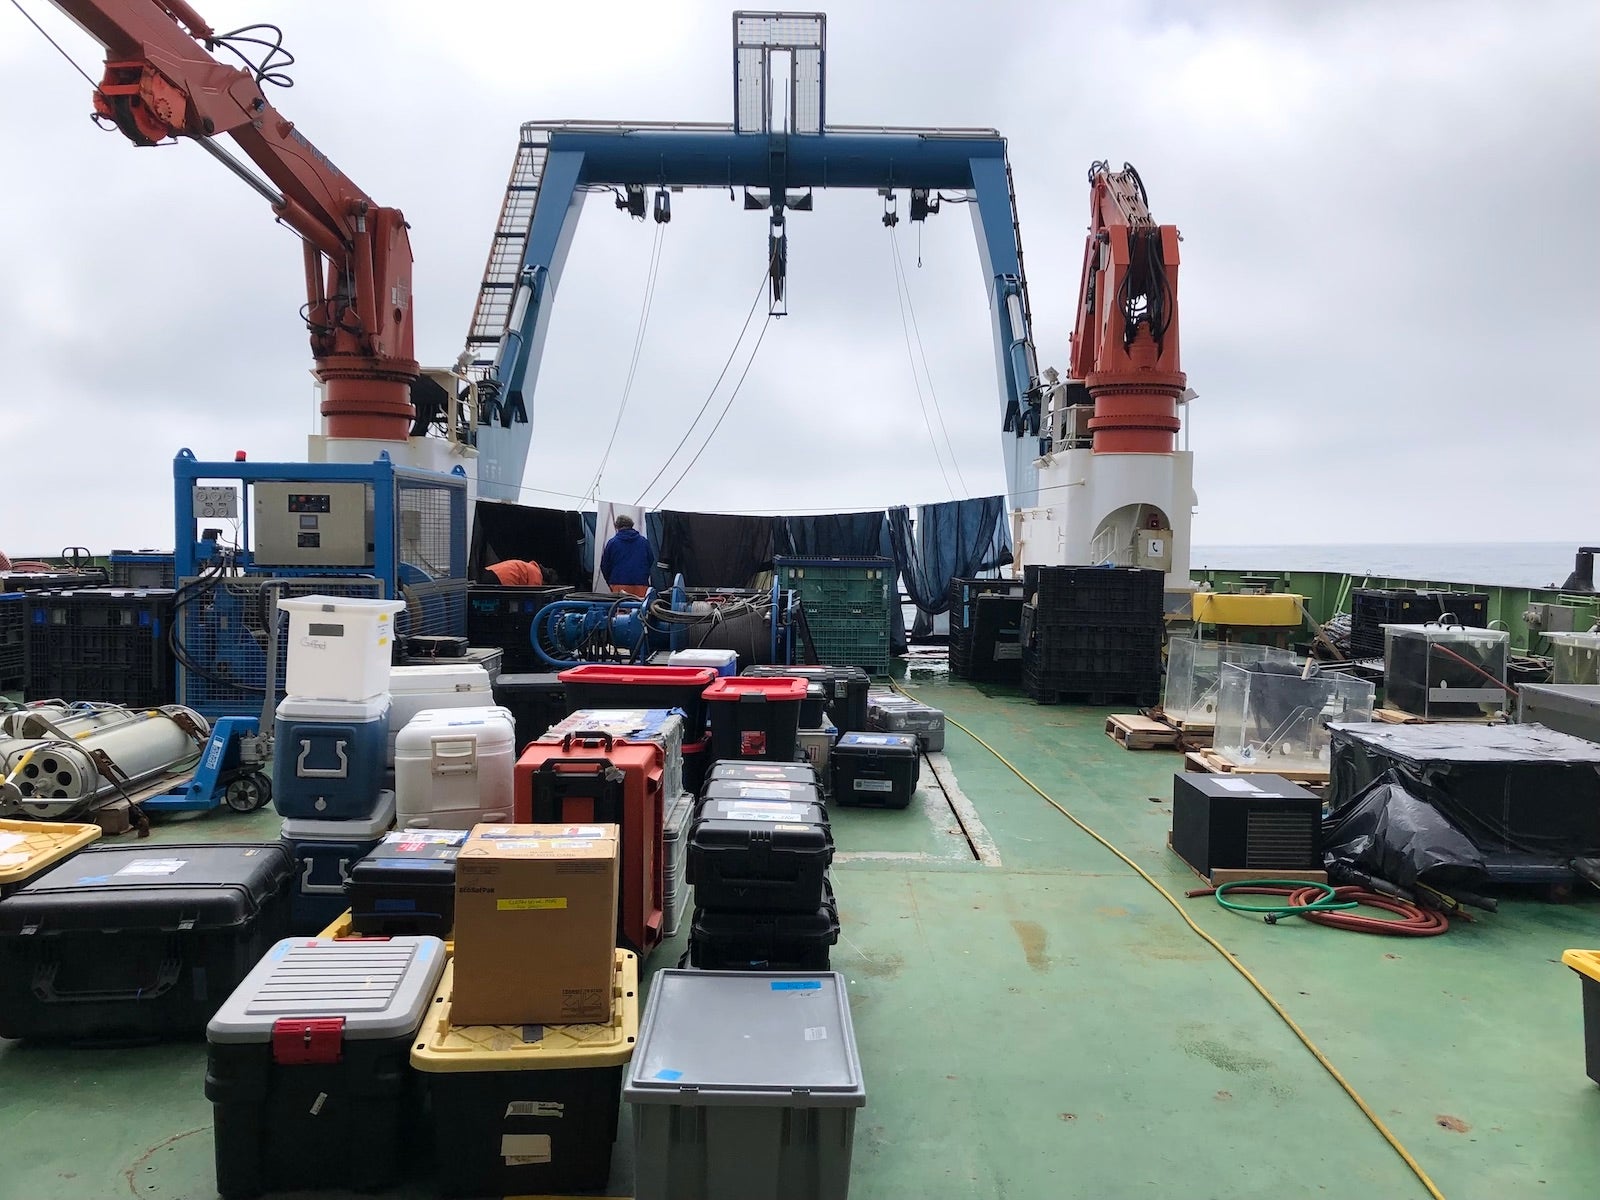 A large number of crates and boxes on the back deck of a research vessel, the deck is green and three large cranes are behind the collection of boxes and crates.